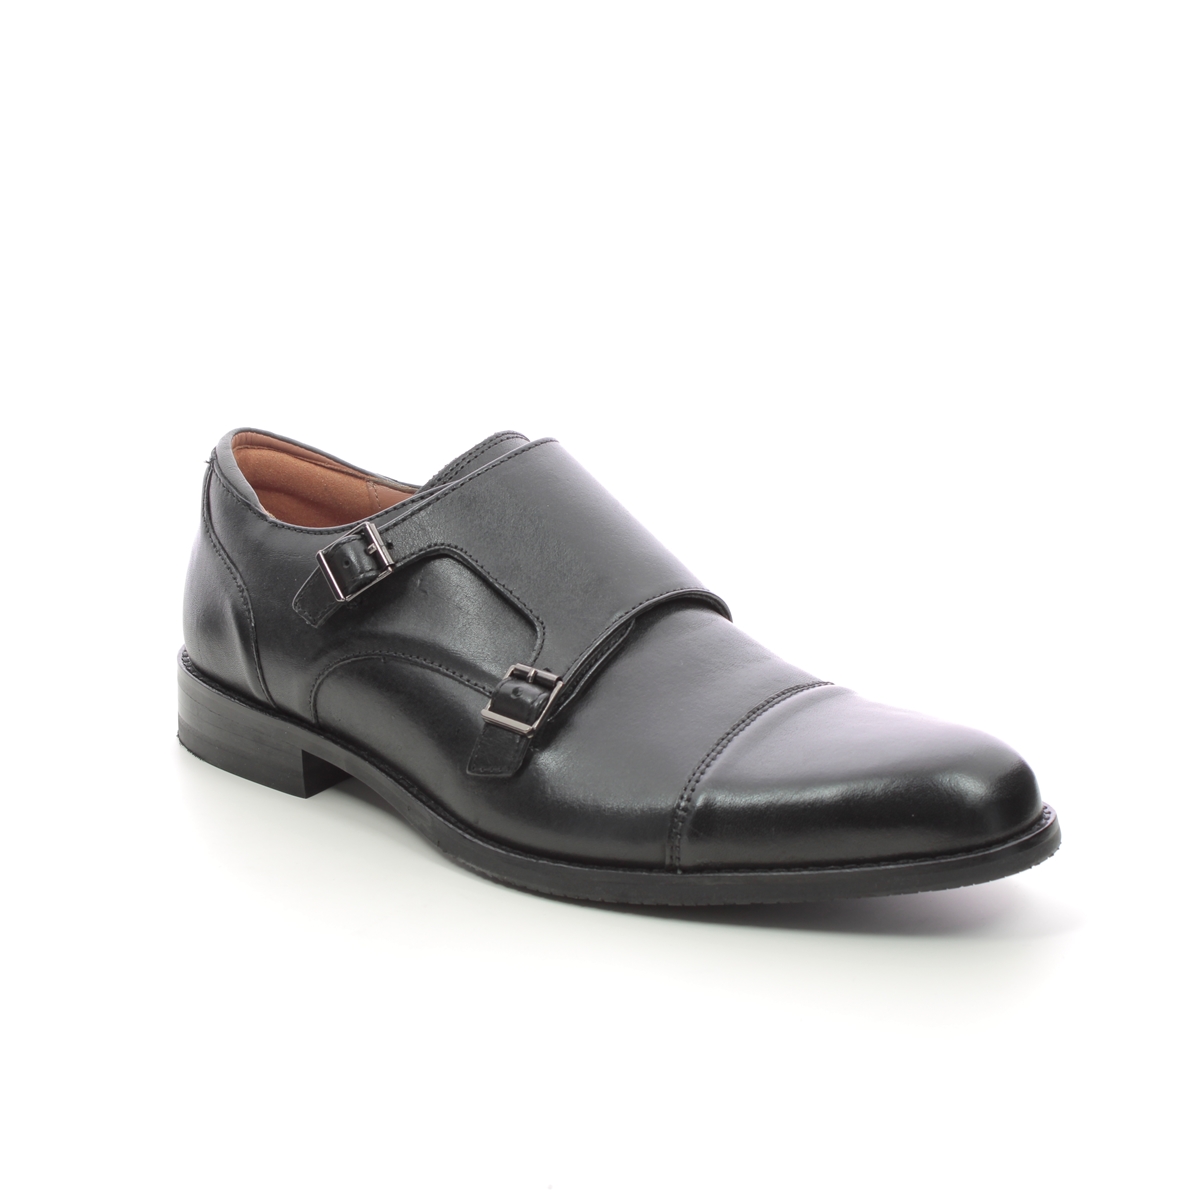 Clarks Craftarlo Monk Black Leather Mens Formal Shoes 724517G In Size 7 In Plain Black Leather G Width Fitting